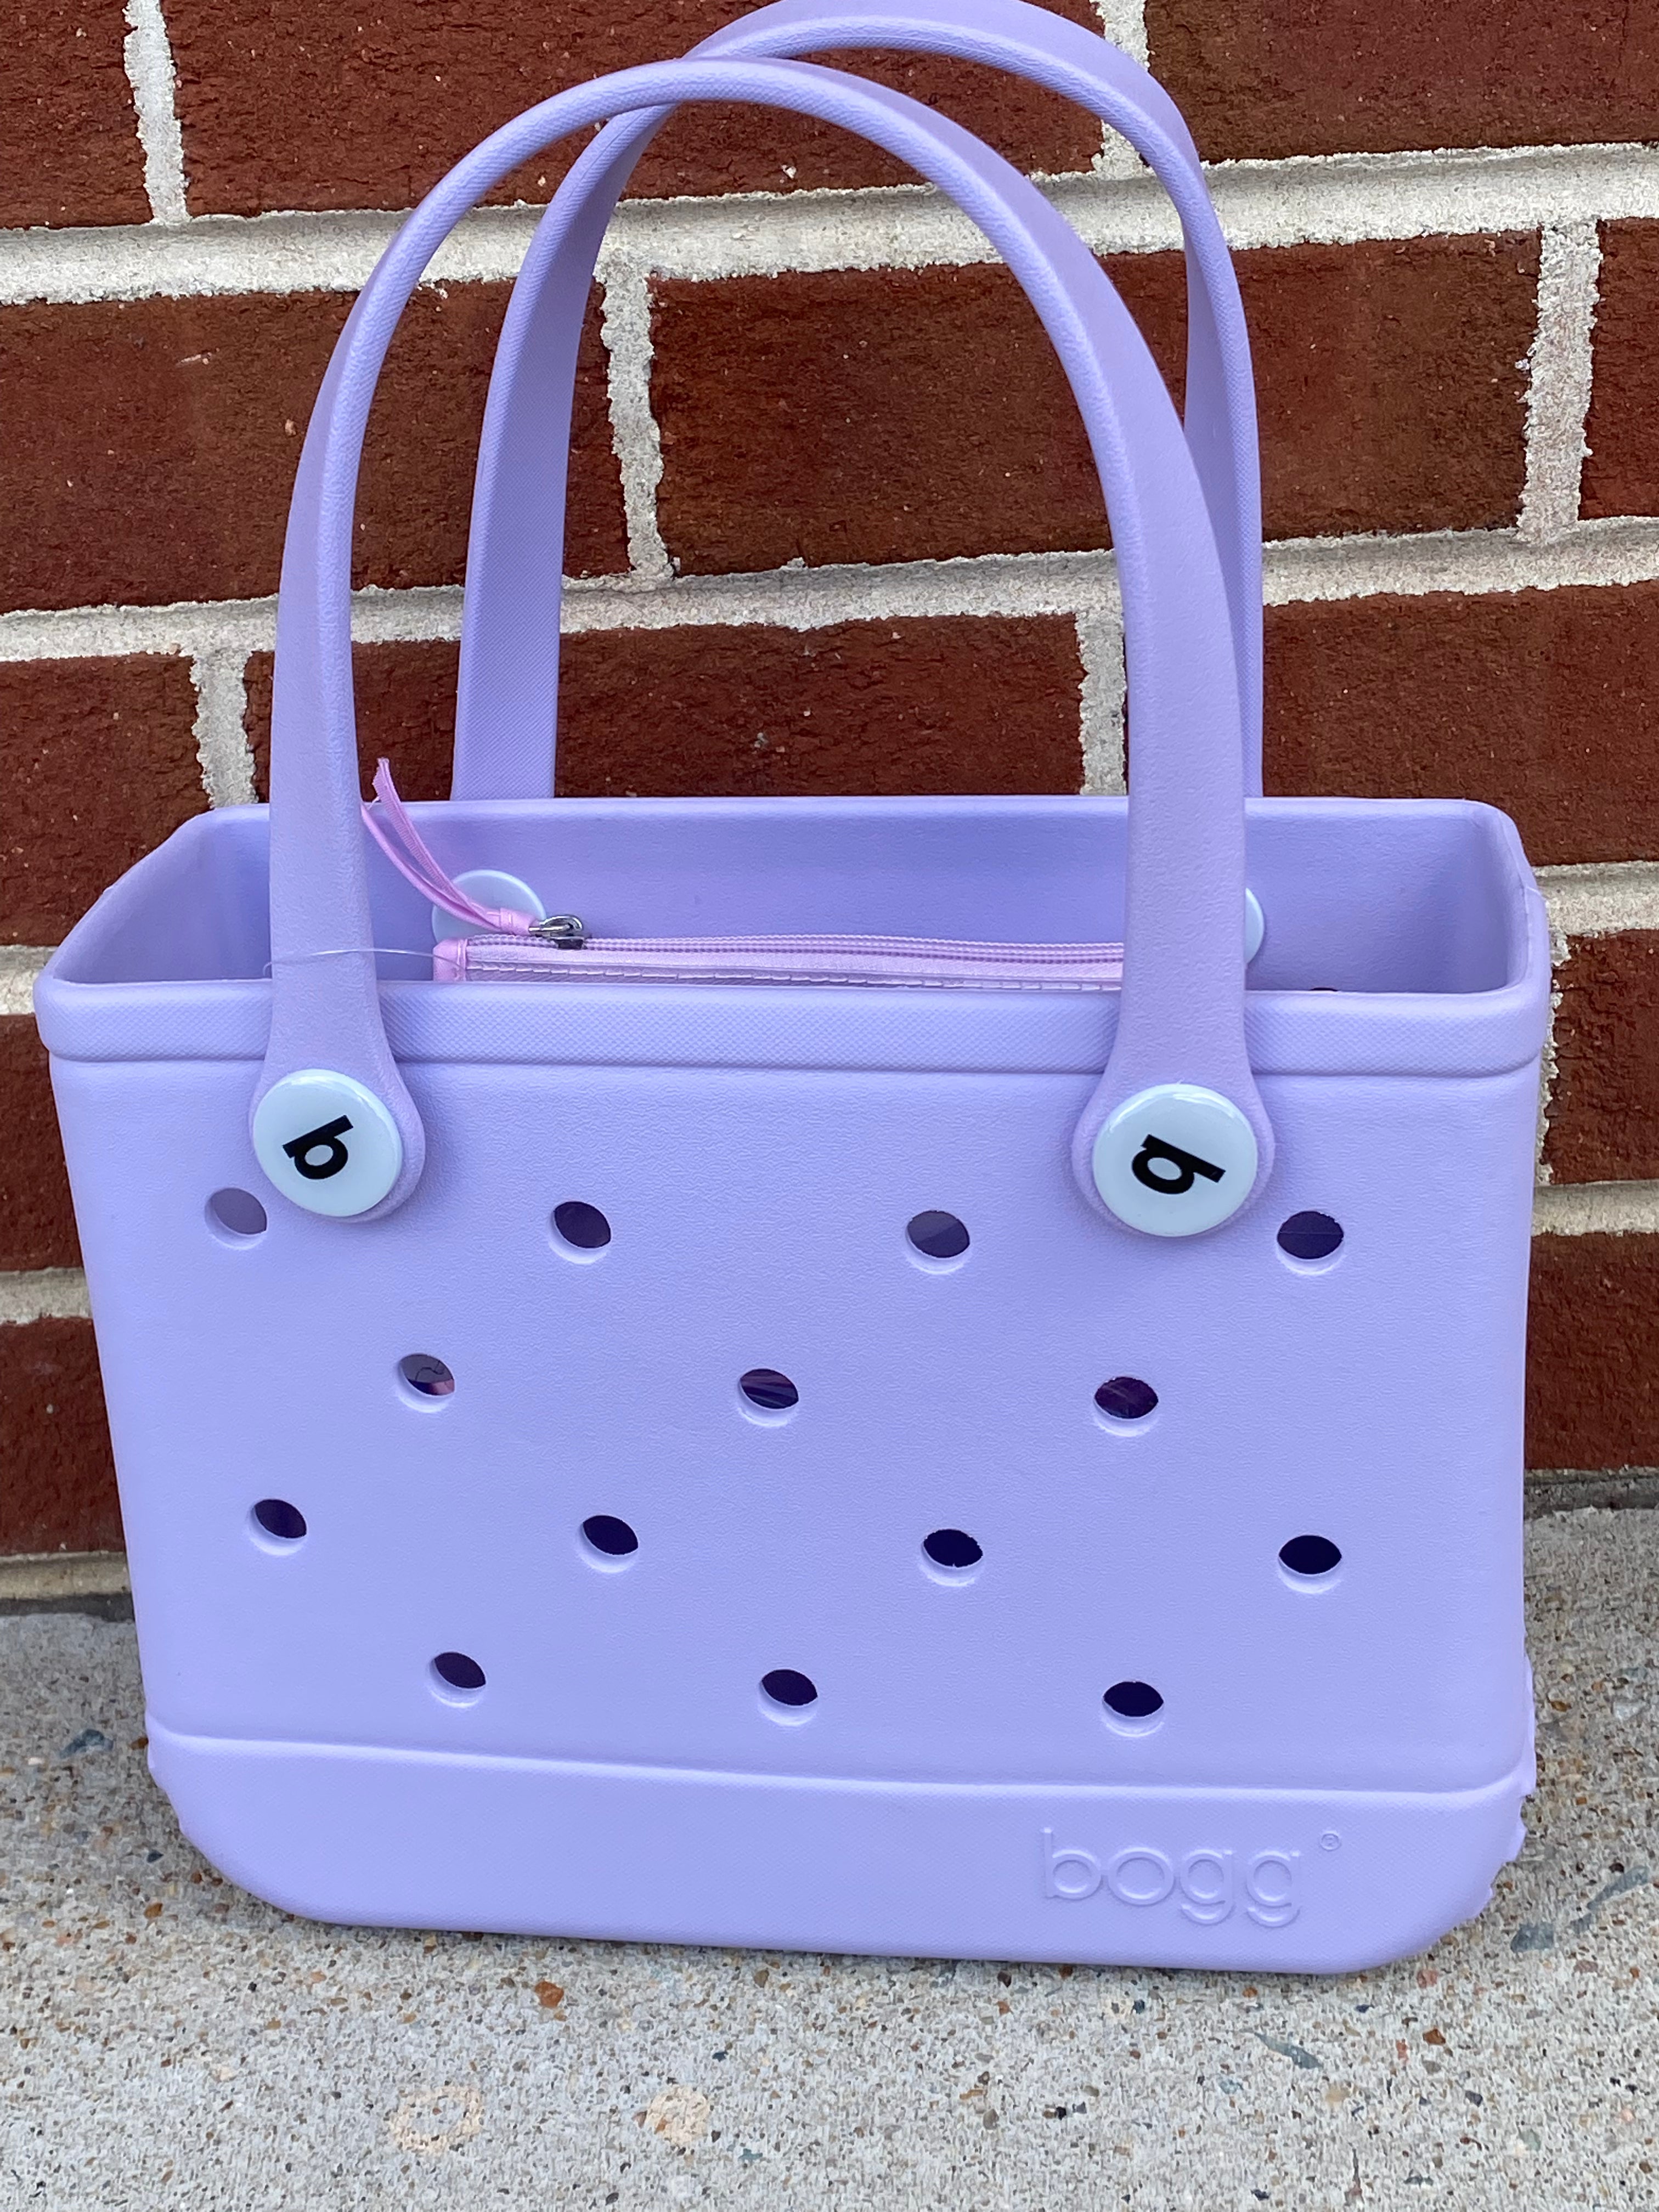 Bogg Bag Baby - Hippity Hoppity Lilac – Becker's Best Shoes